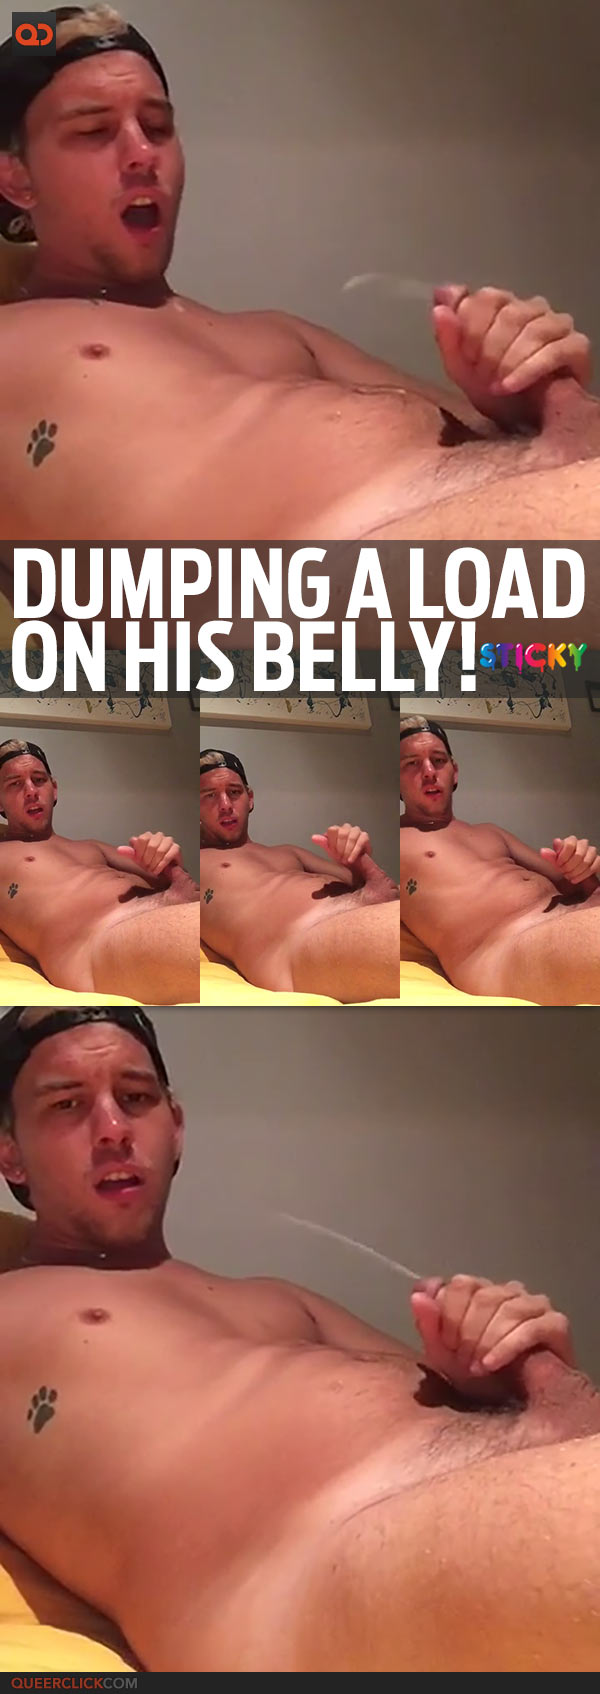 qc-sticky-dumping_a_load_on_his_belly-teaser